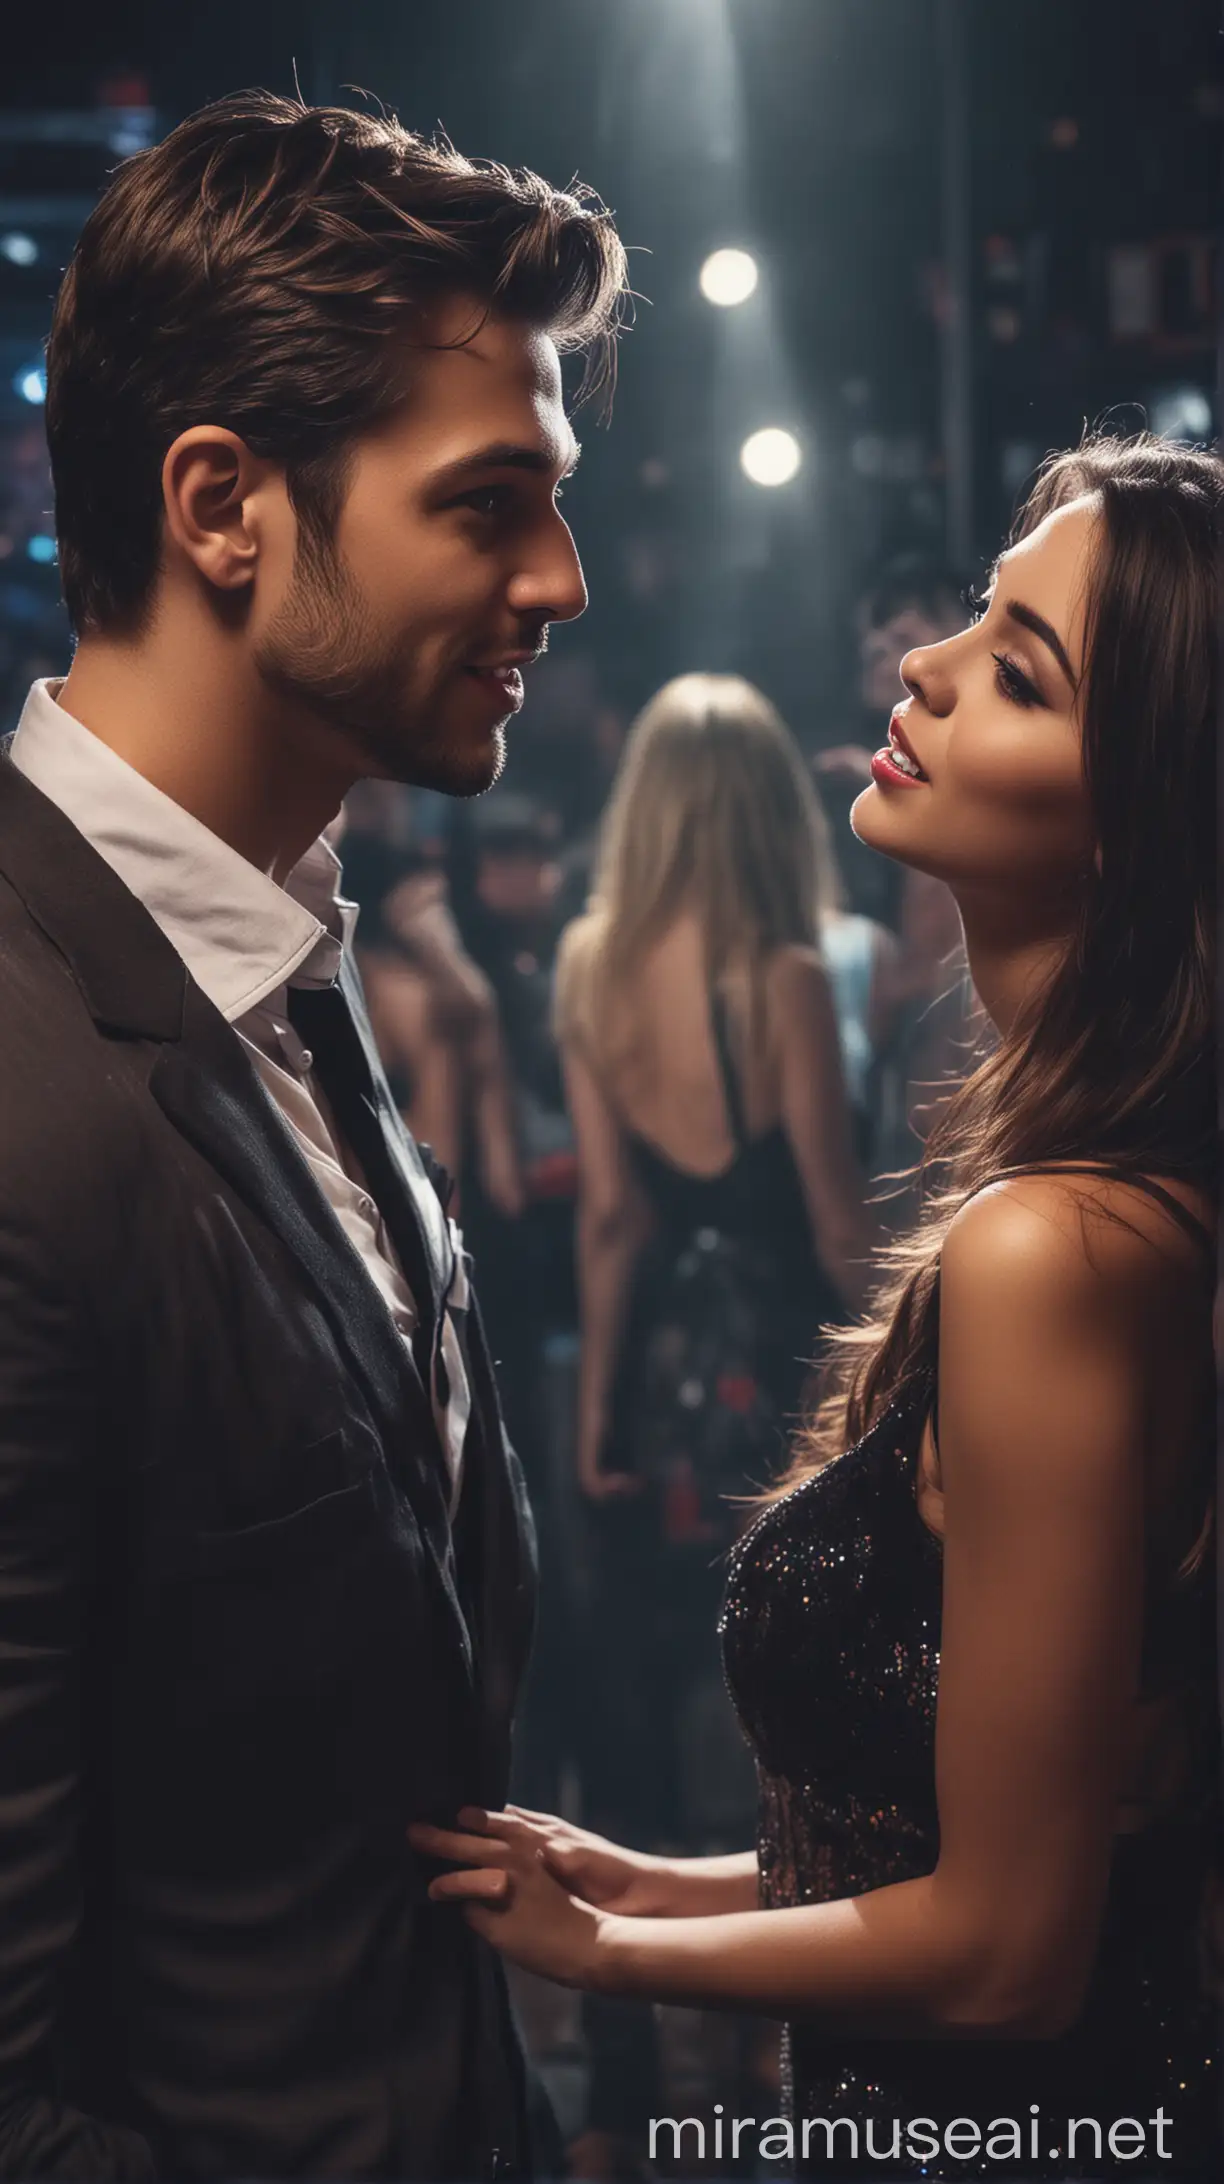 create an image of a man talking to a beautiful girl on a night club